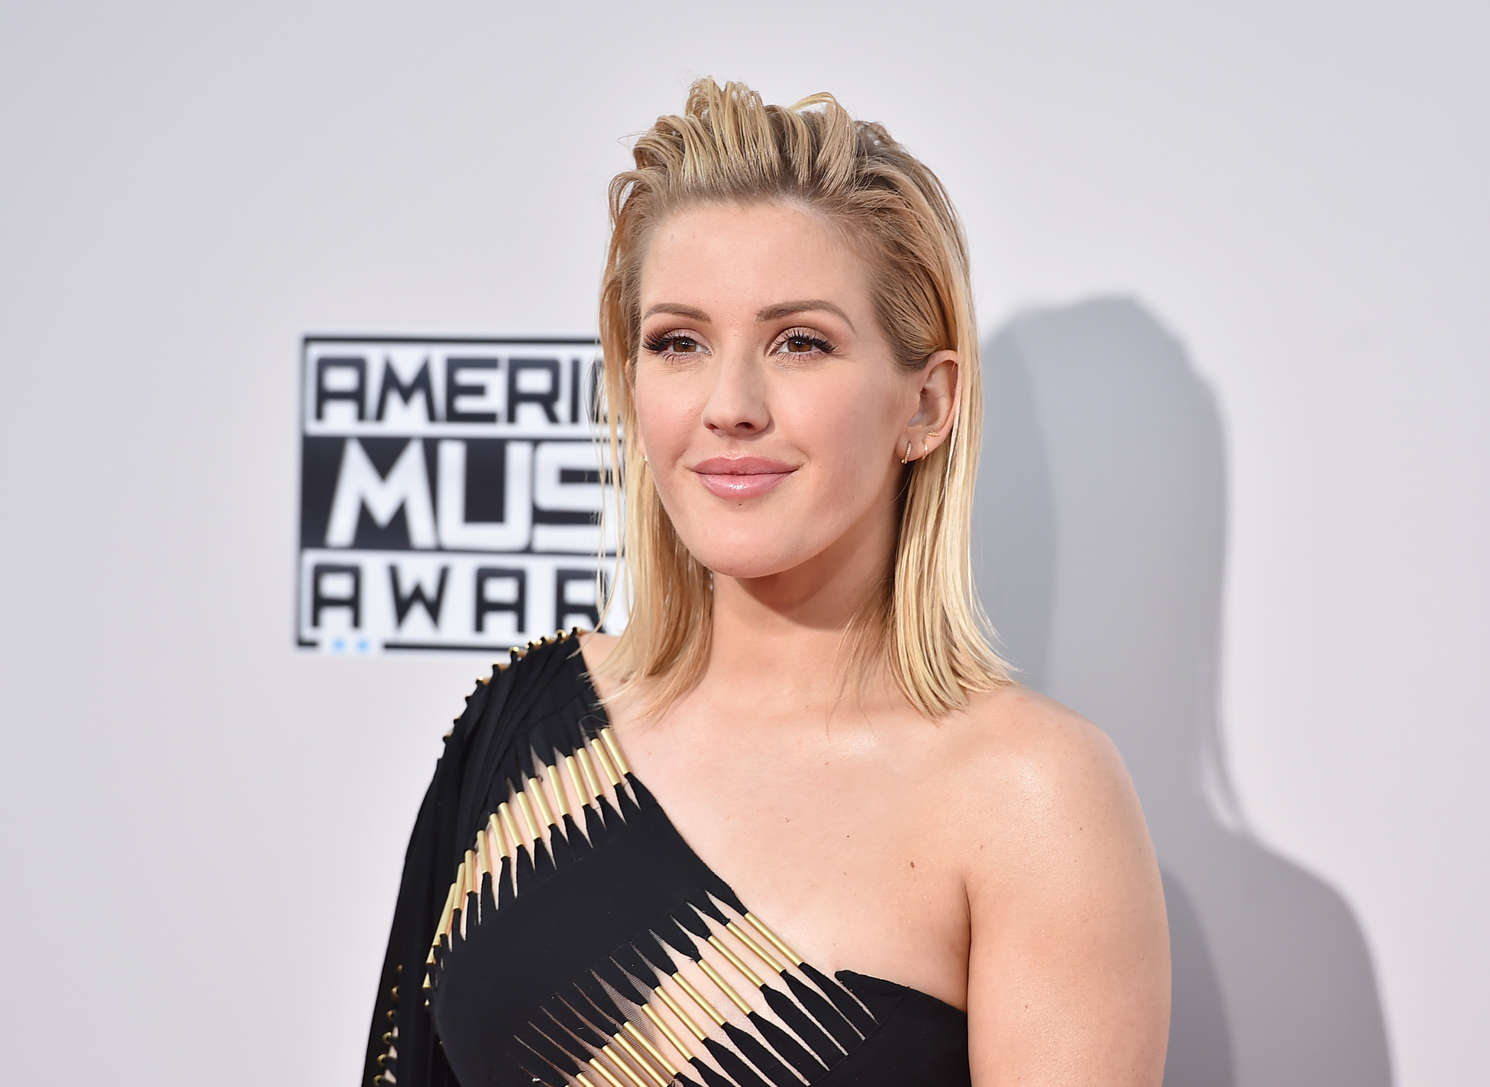 Ellie Goulding attends 2015 American Music Awards